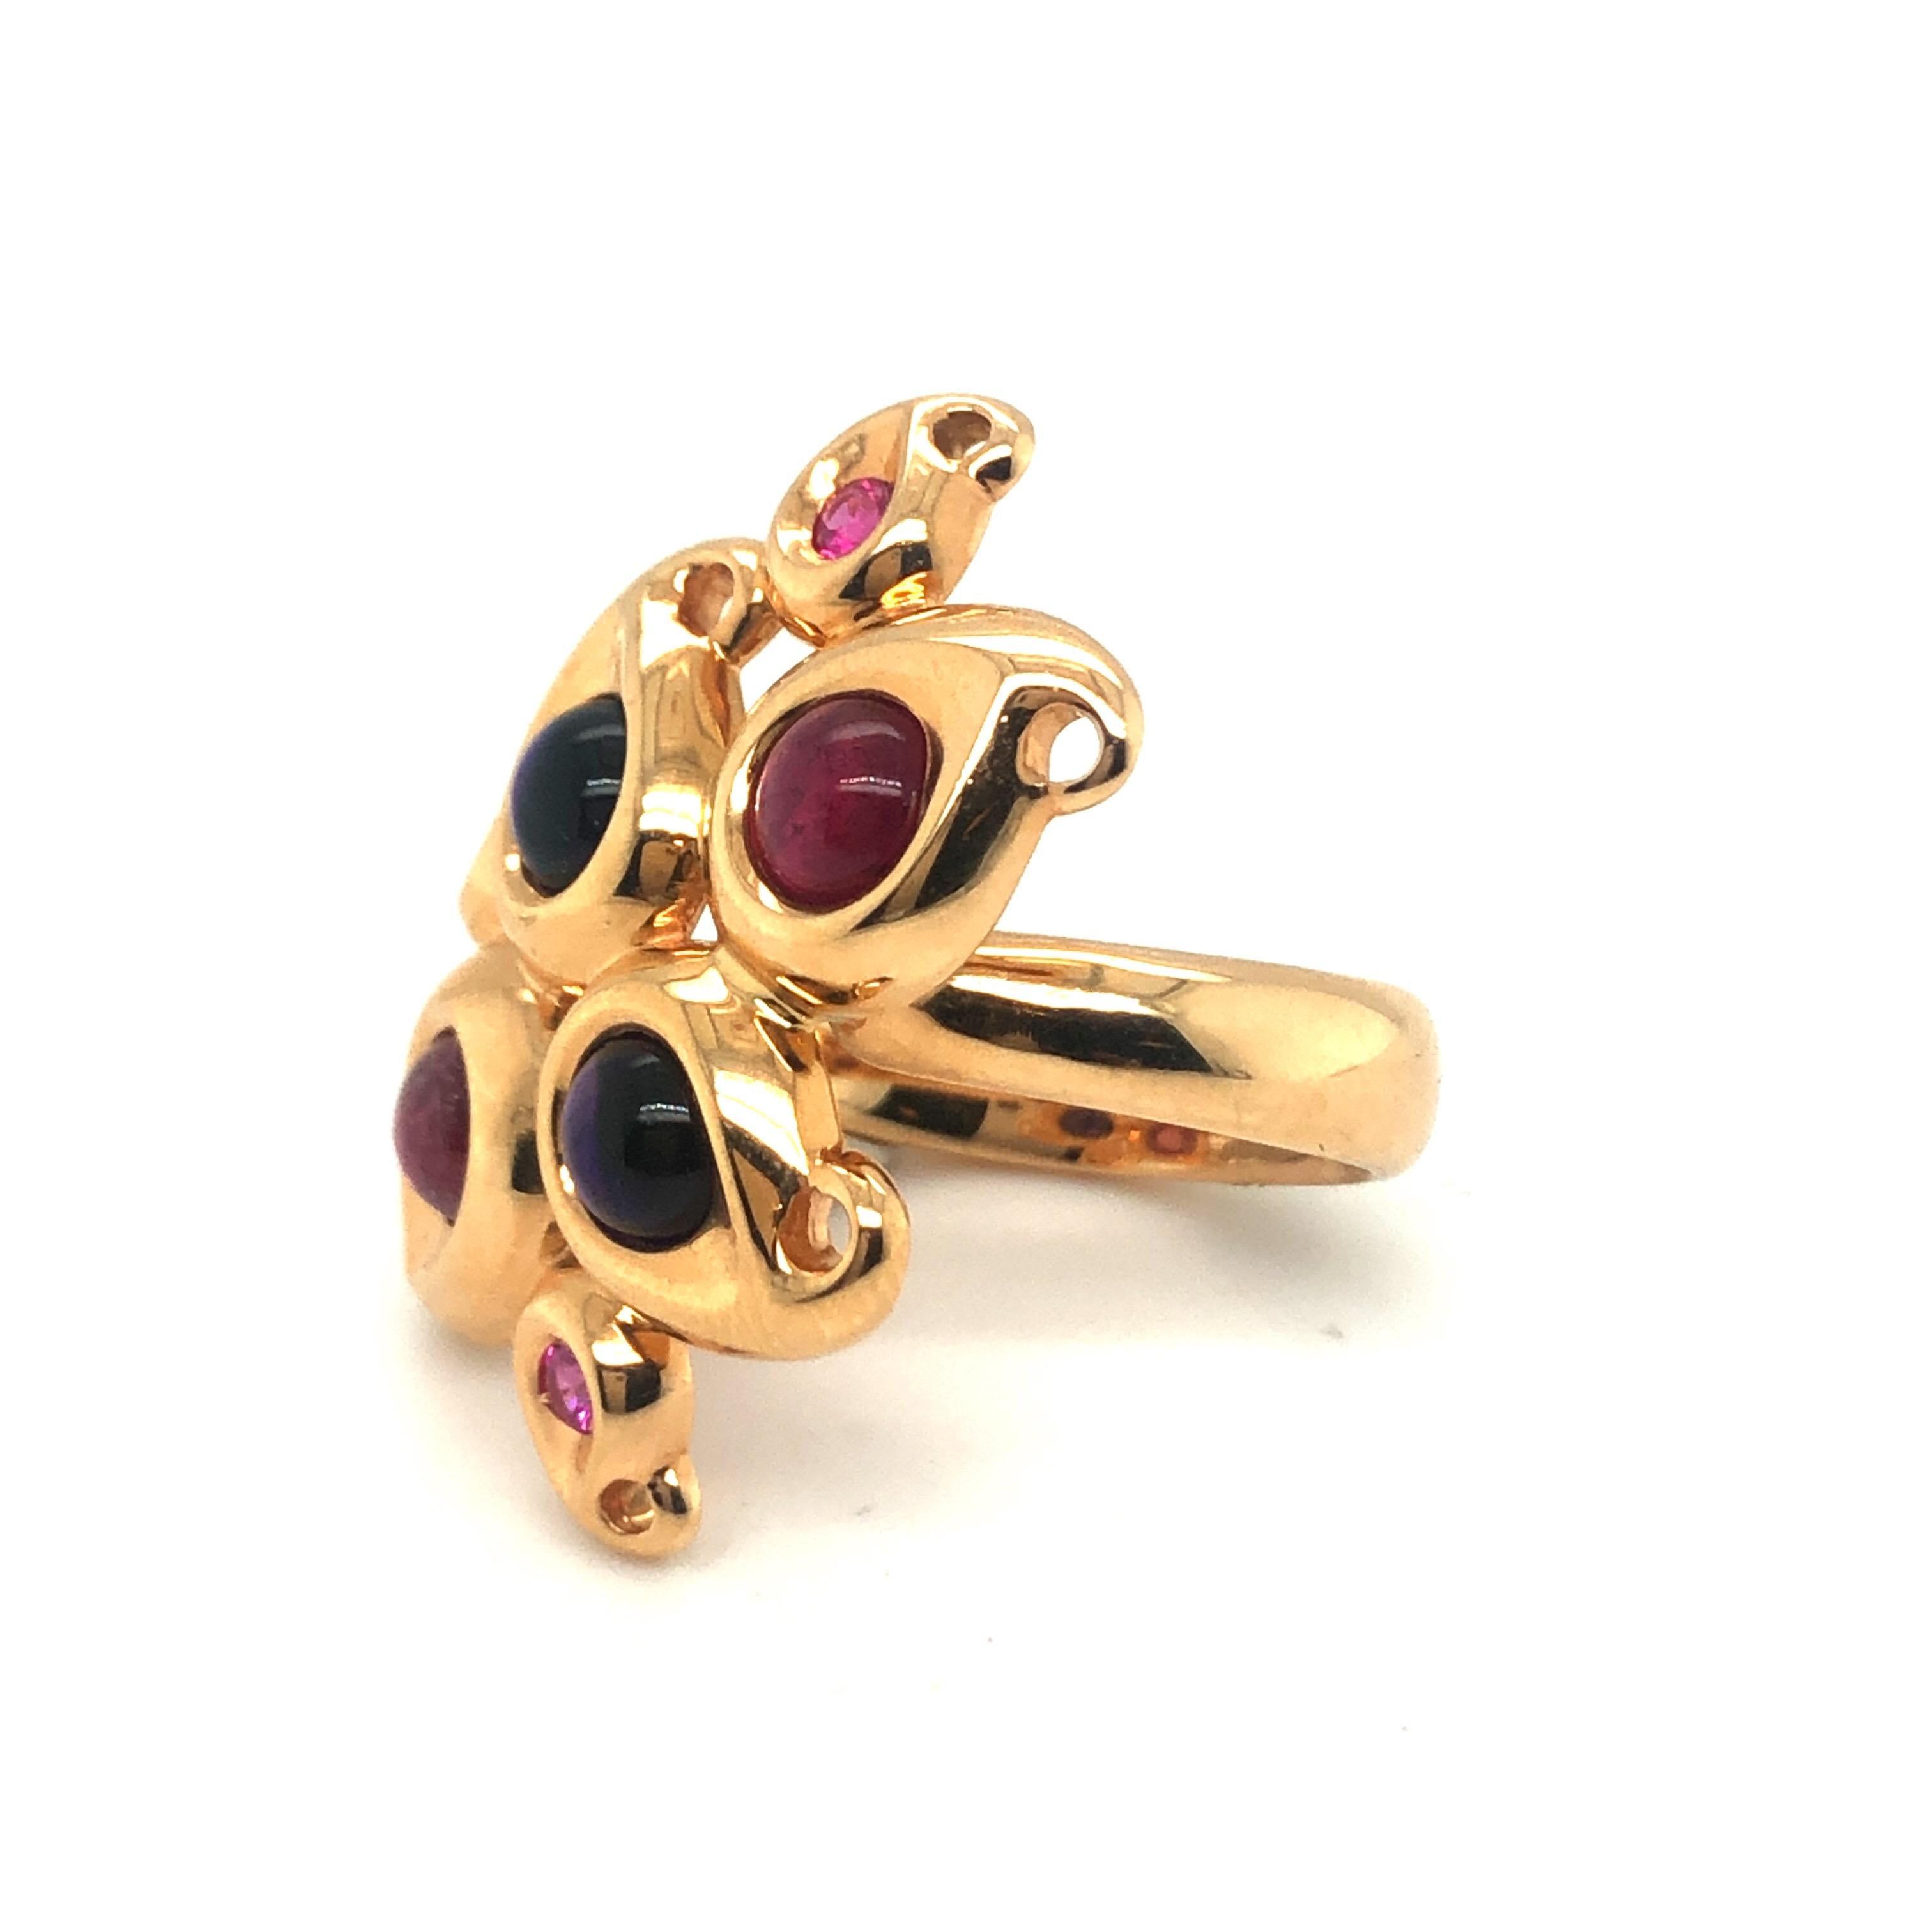 Joyful 18 karat rose gold, pink tourmaline, amethyst and pink sapphire cocktail ring by Tamara Comolli.
Crafted in 18 karat rose gold, the ring head consisting of a cluster of paisley shaped elements set with 2 pink tourmaline cabochons, 2 amethyst